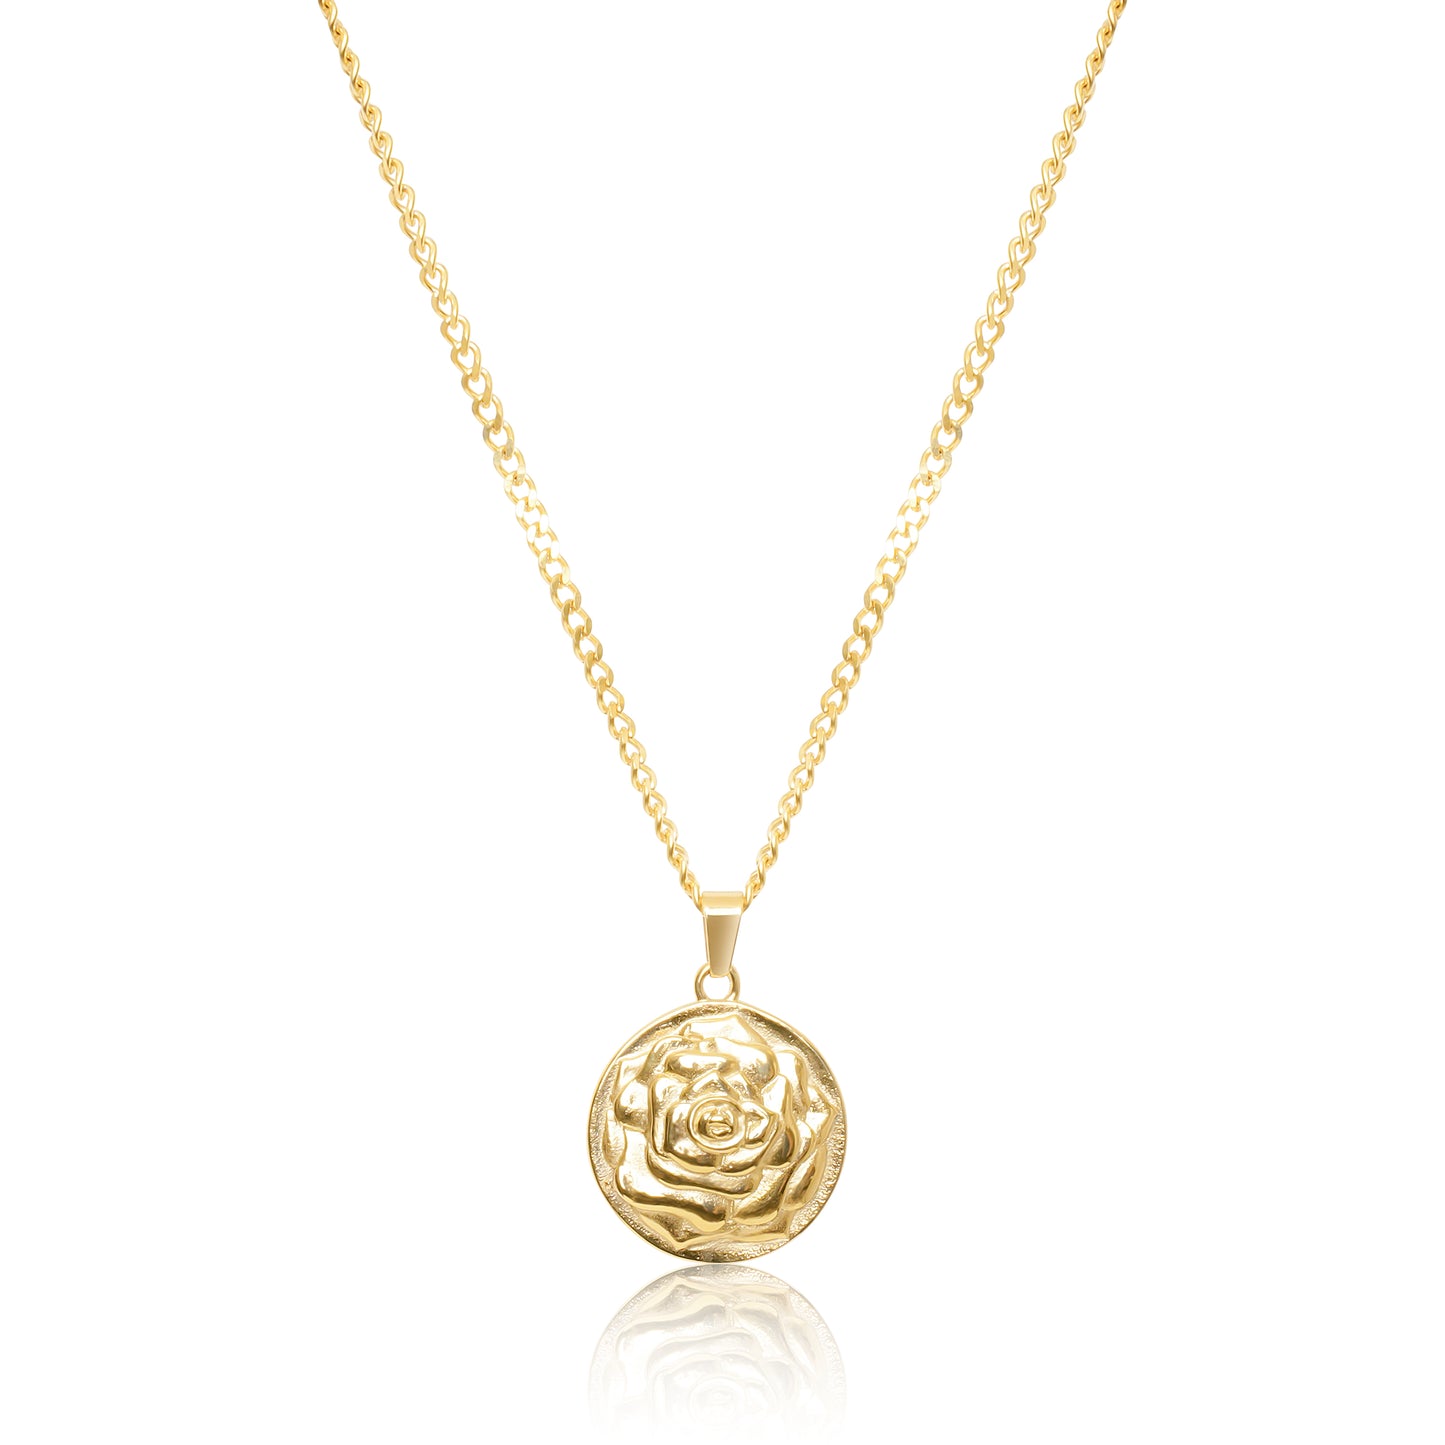 Rose Pendant Necklace - Silver / Gold